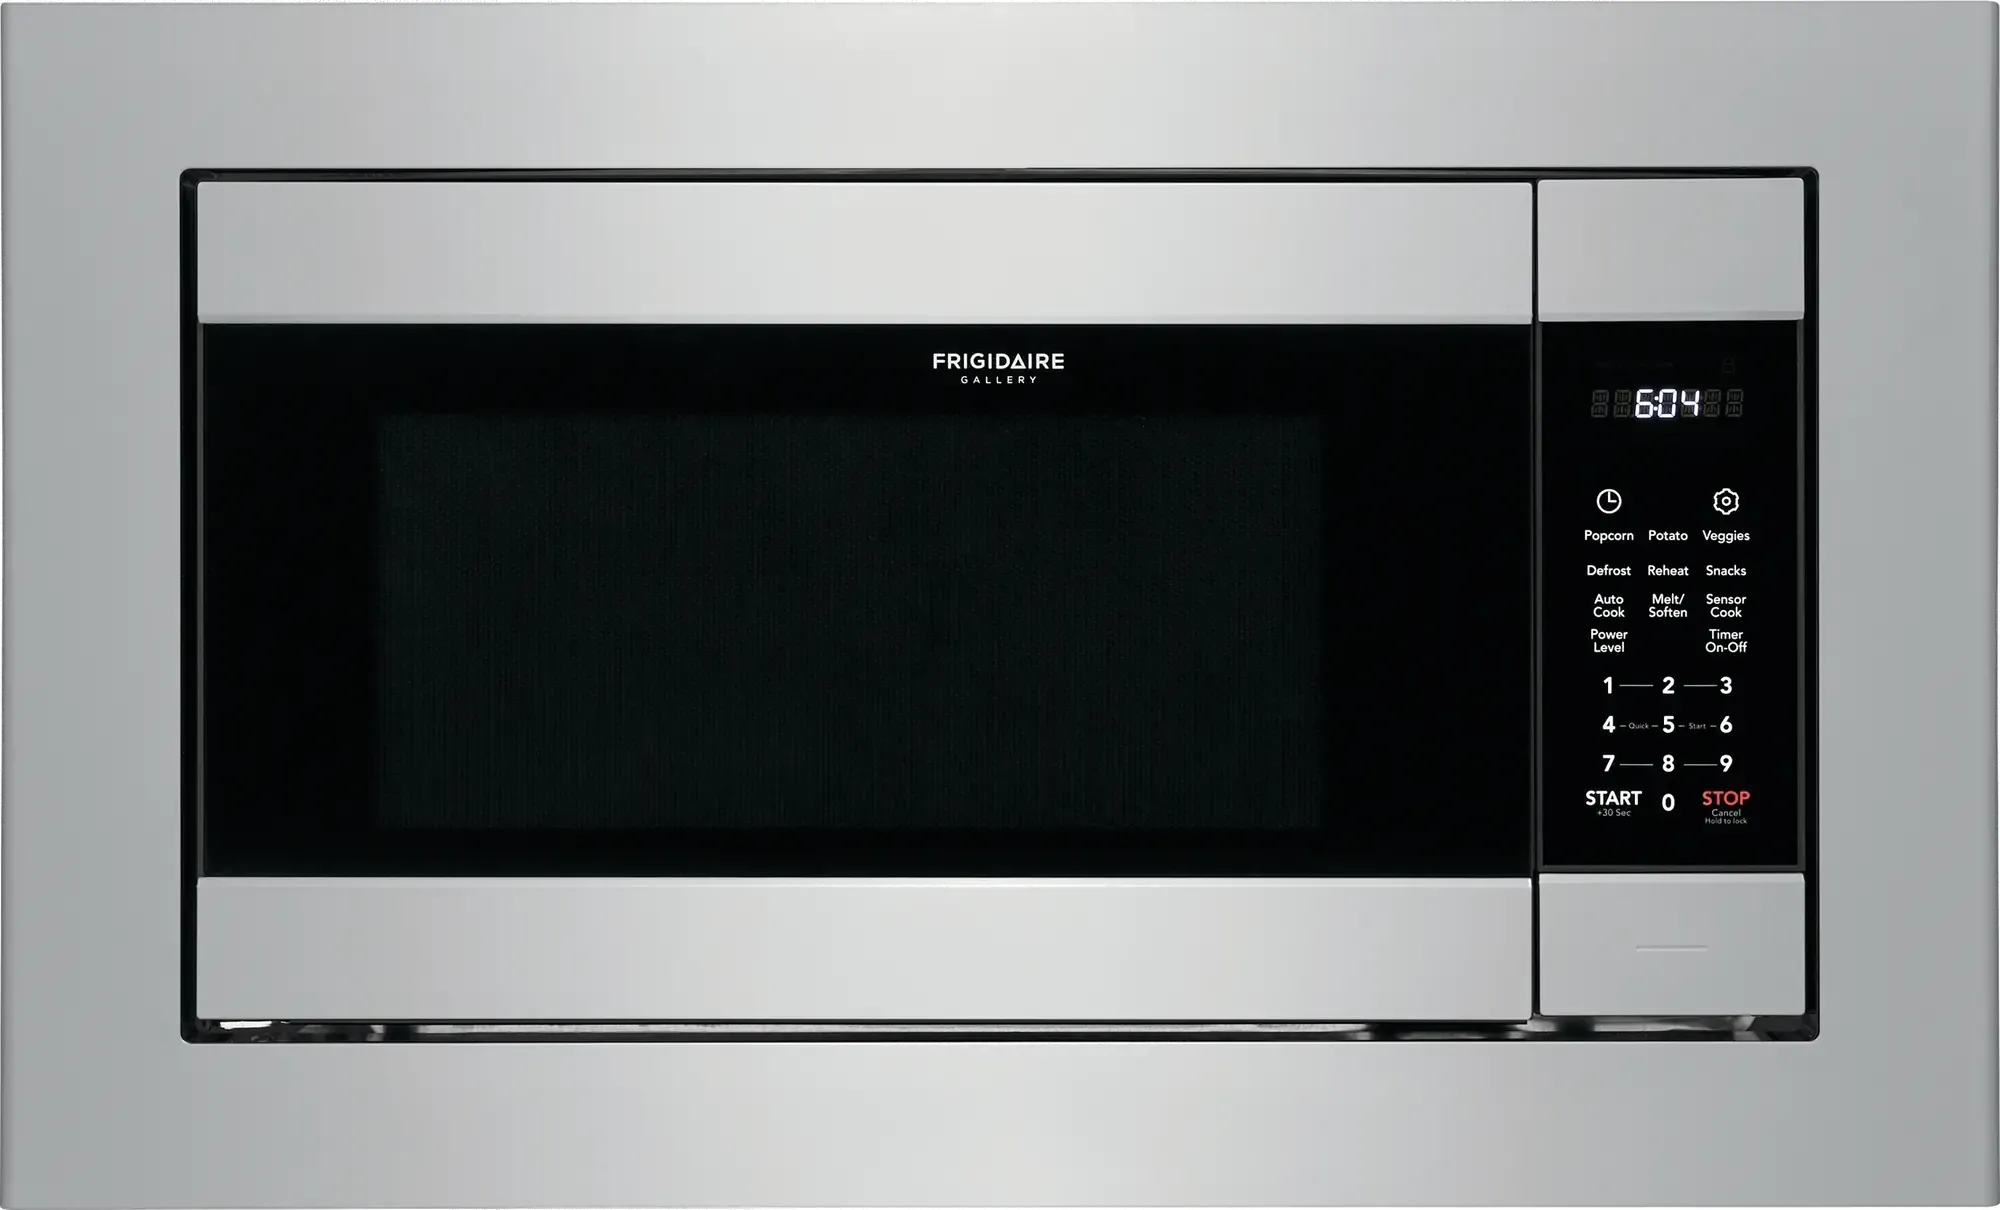 Frigidaire Gallery 24 Inch Countertop Microwave - 2.2 cu. ft.， Stainless Steel